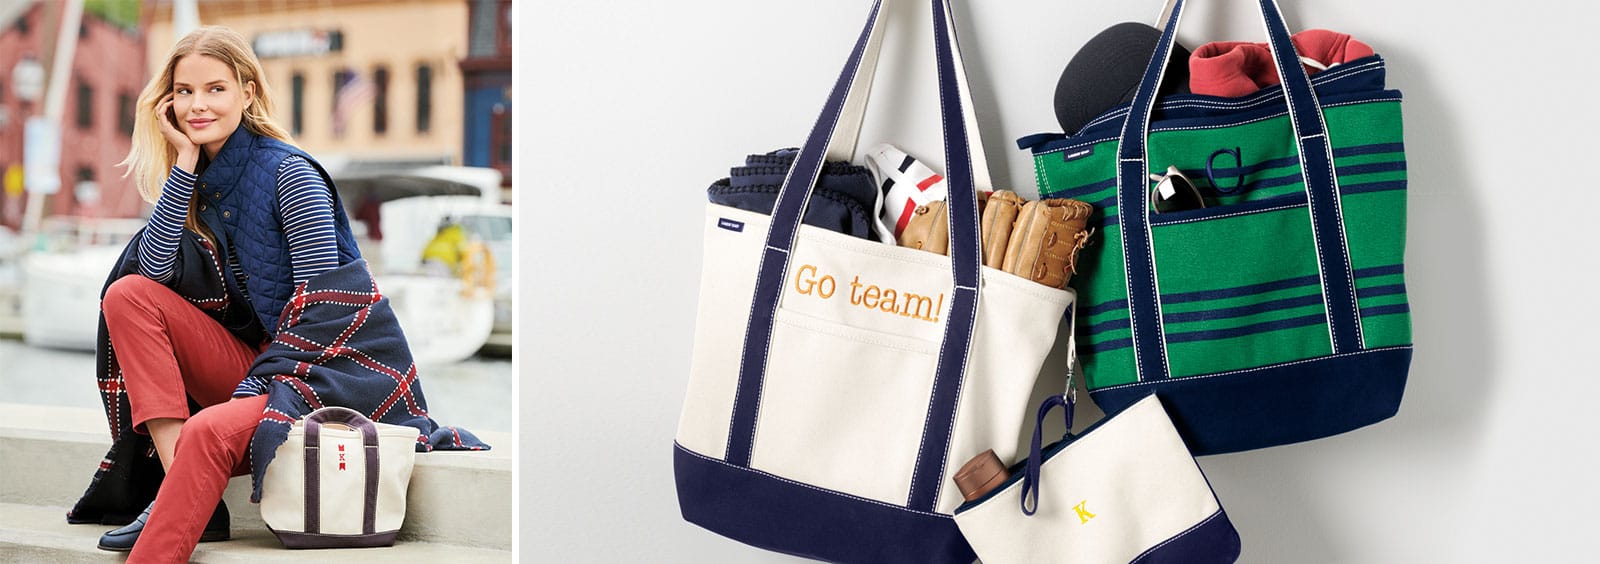 What is a Tote Bag Used For? 20 Uses Explained